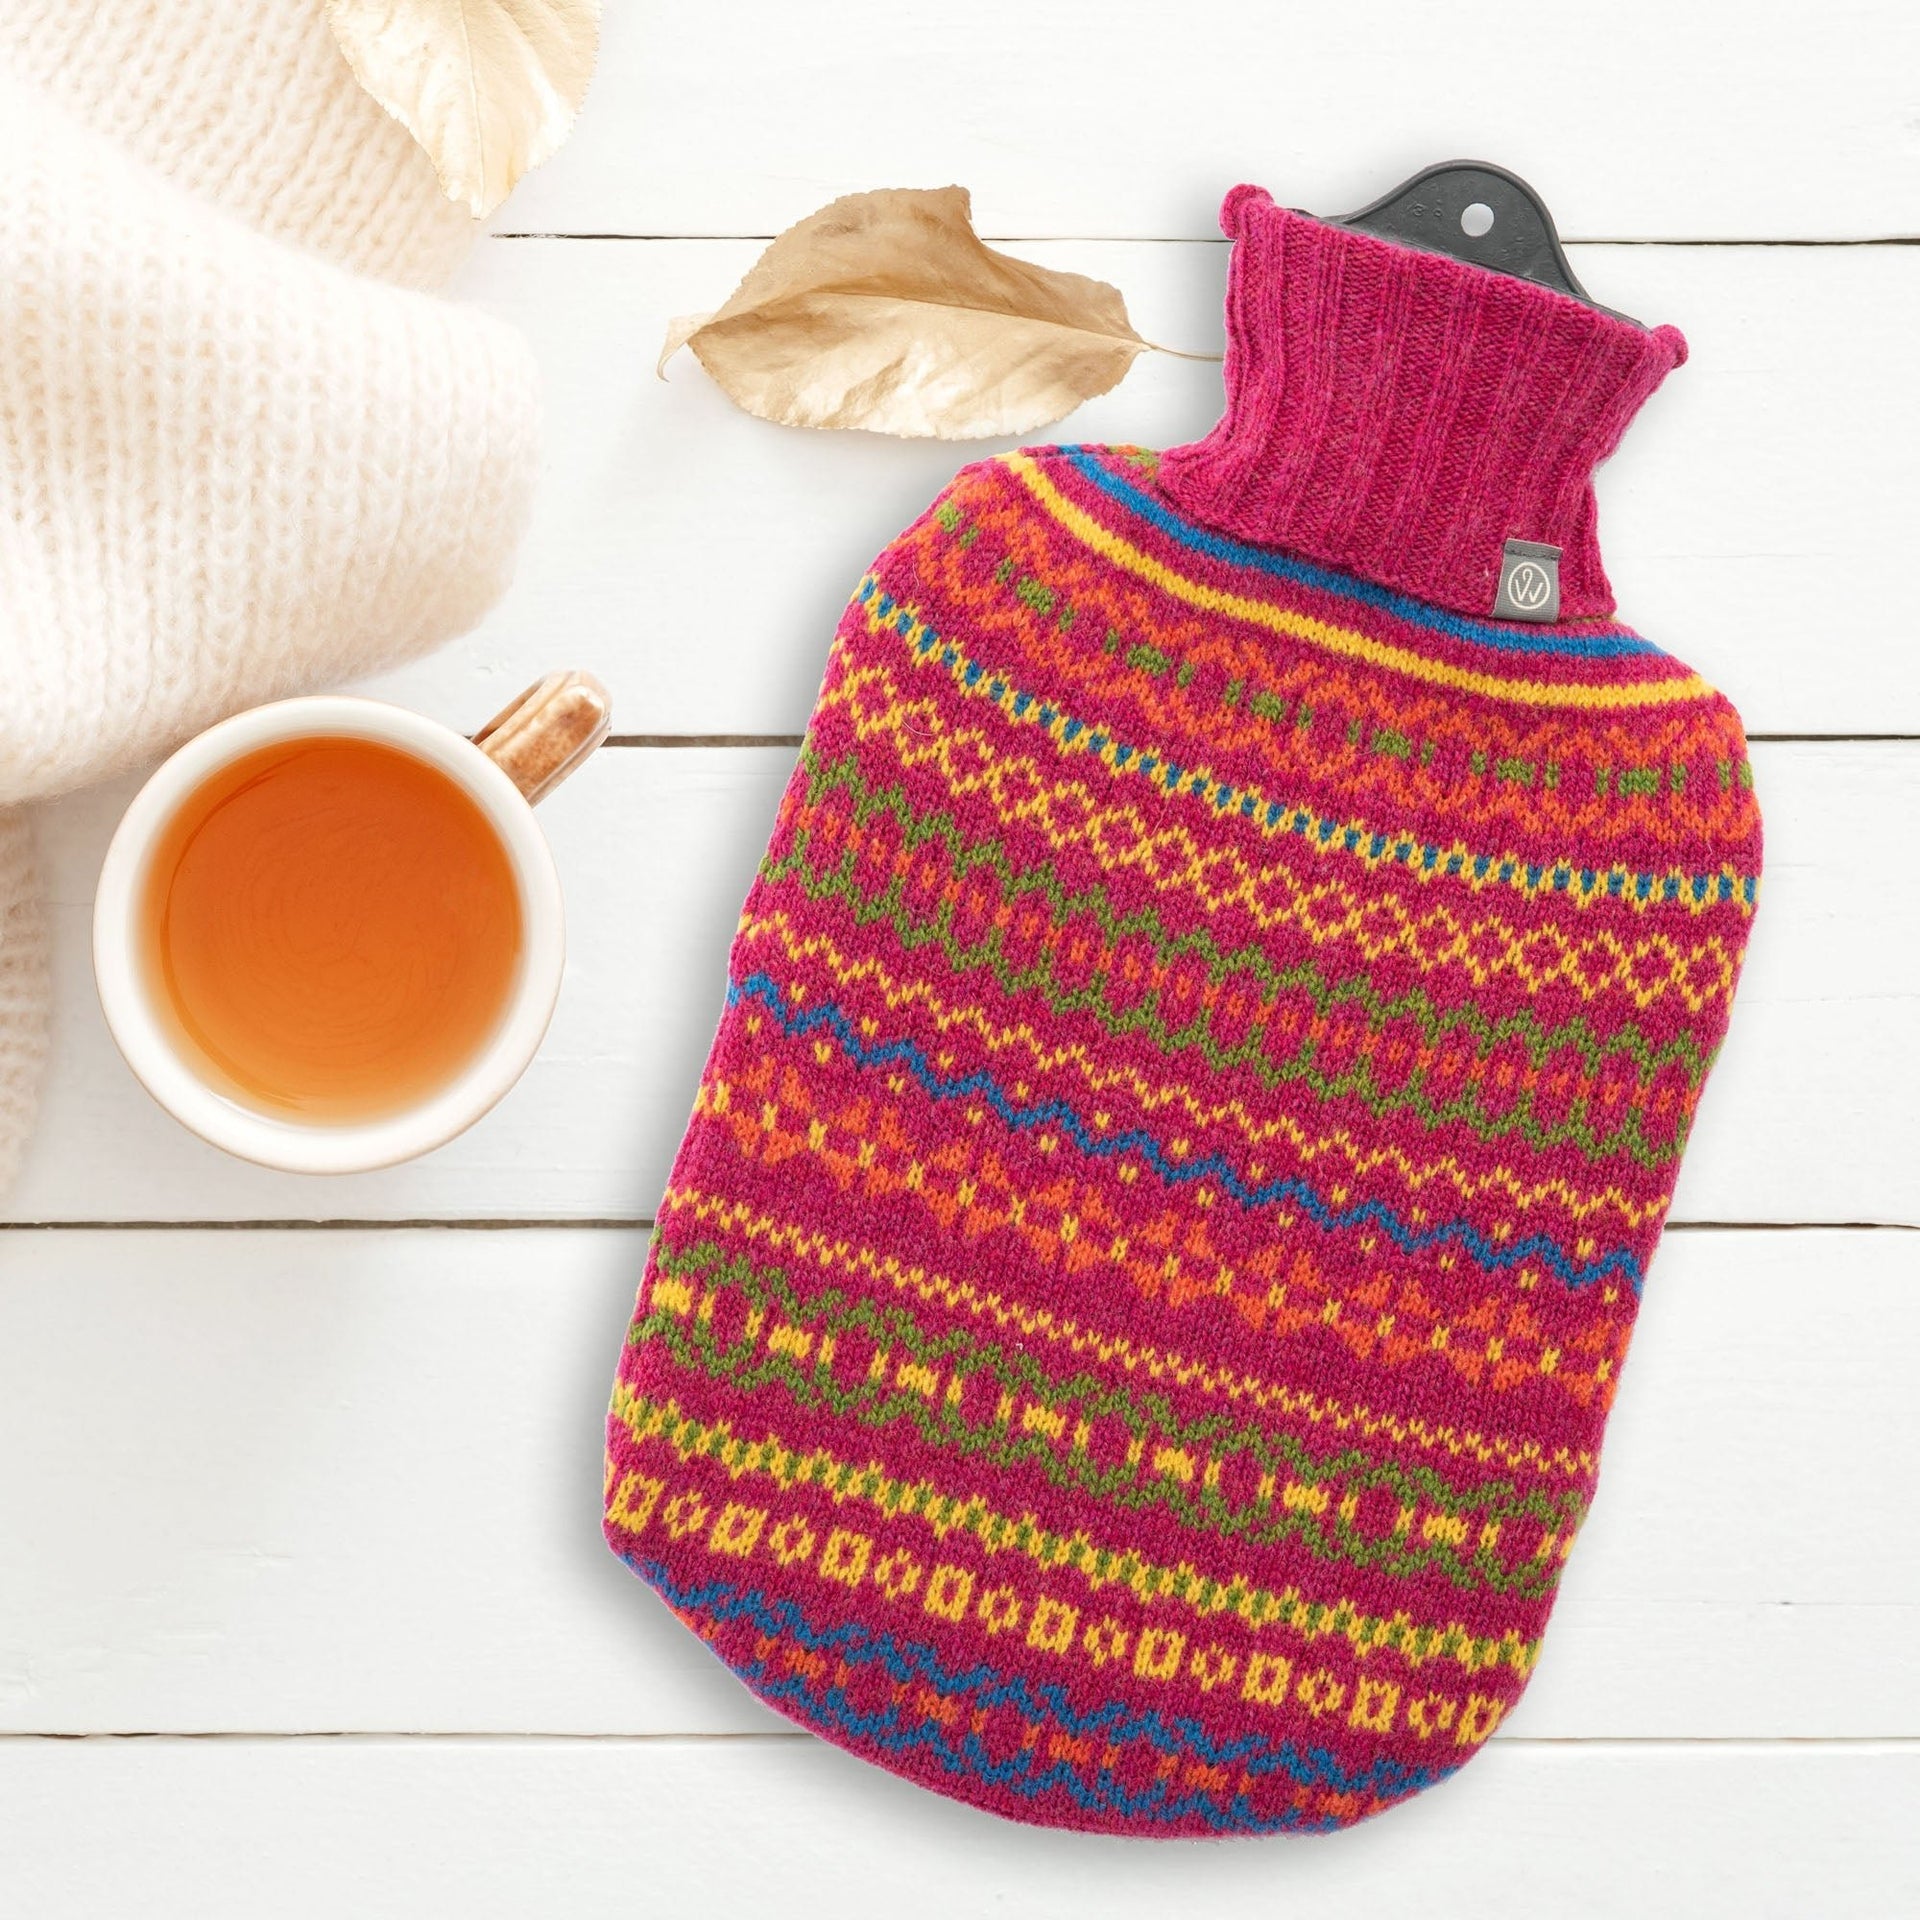 Lambswool Knit Fair Isle Sustainable Hot Water Bottle Brights - Made Scotland